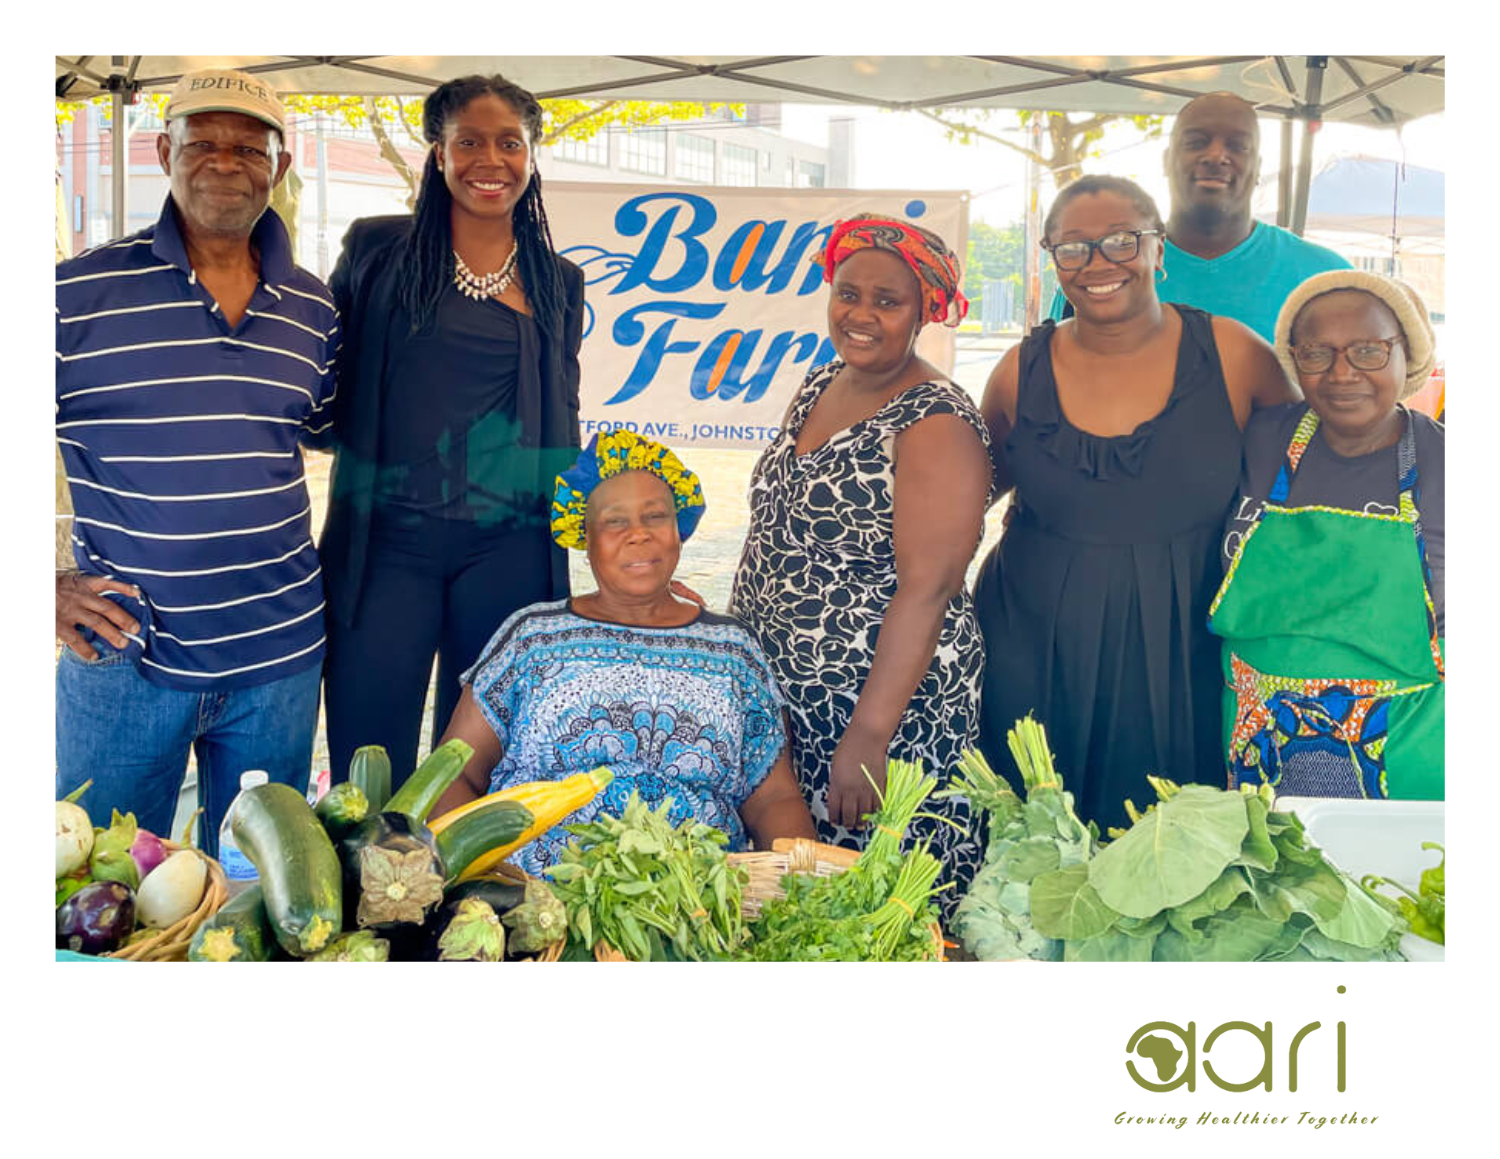 Members of the African Alliance of Rhode Island gather for a group photo at a farmers' market.